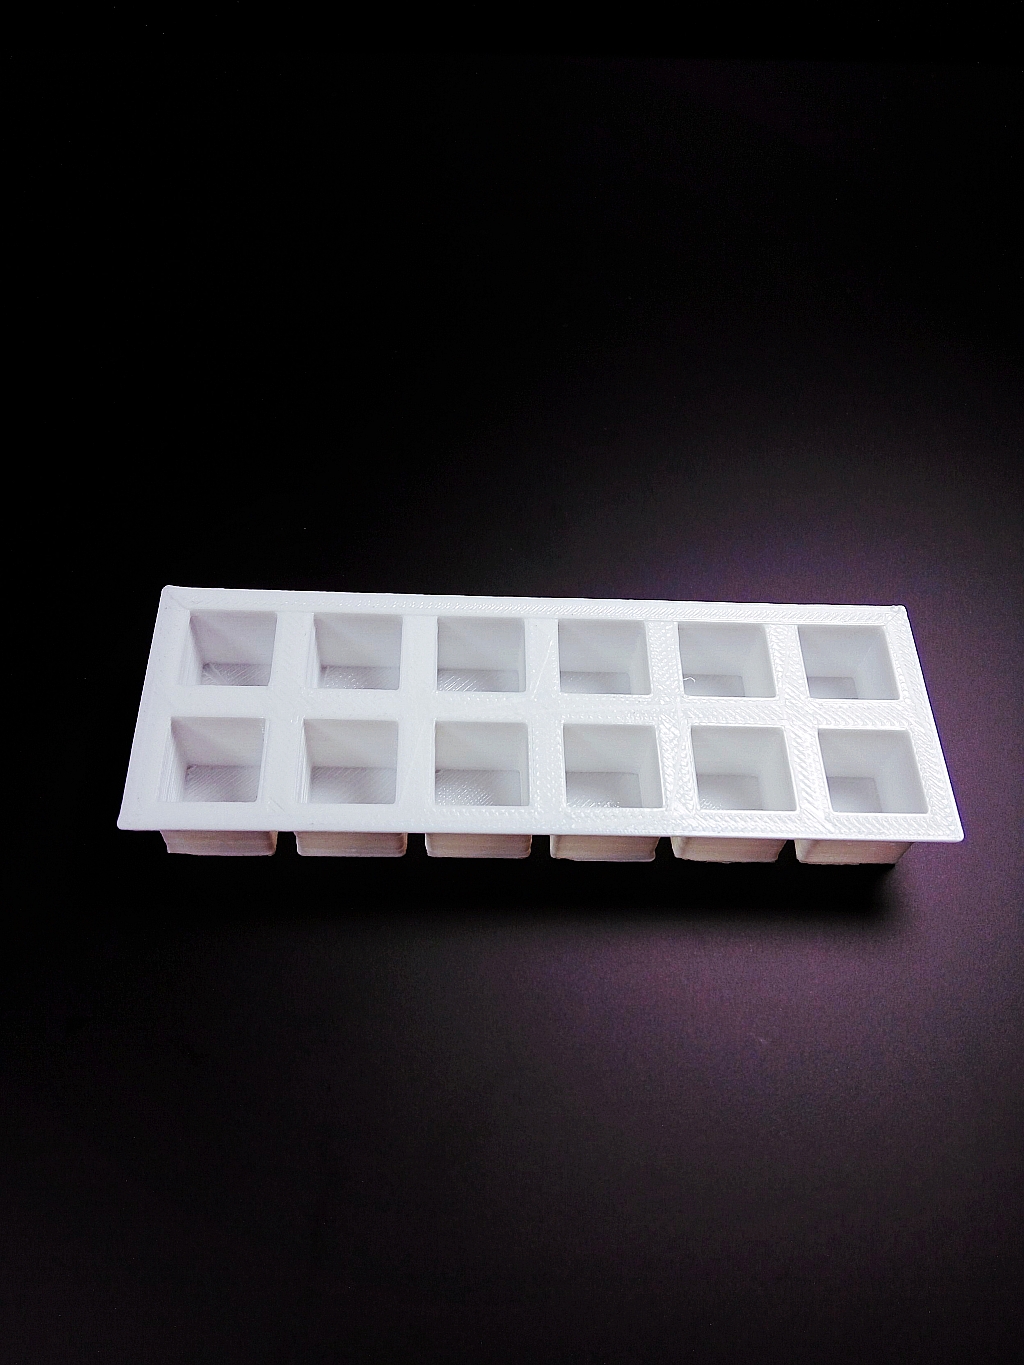 The Perfect Ice Cube Tray image